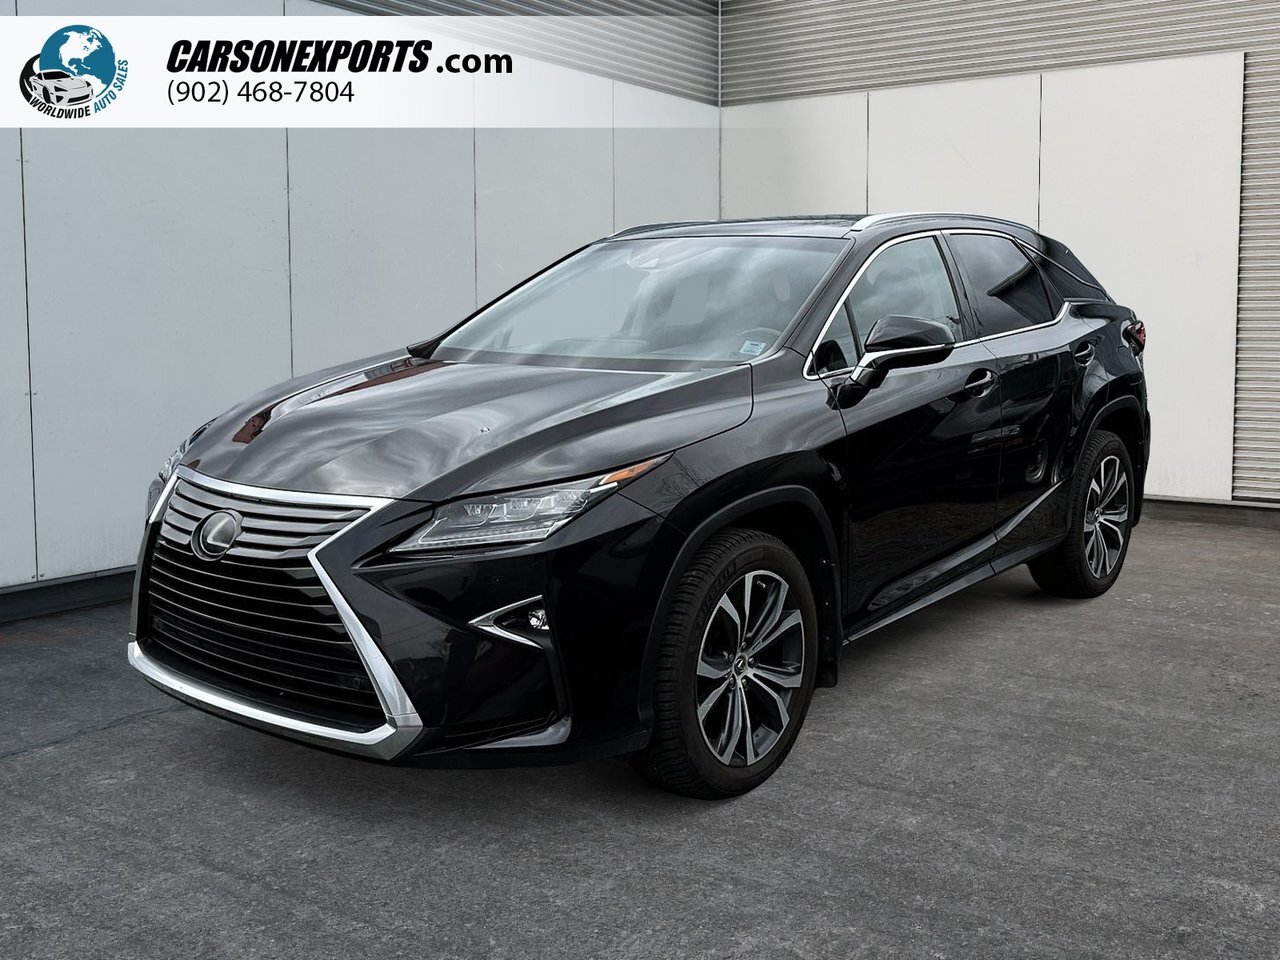 2017 Lexus RX 350 The best place to buy a used car. Period.